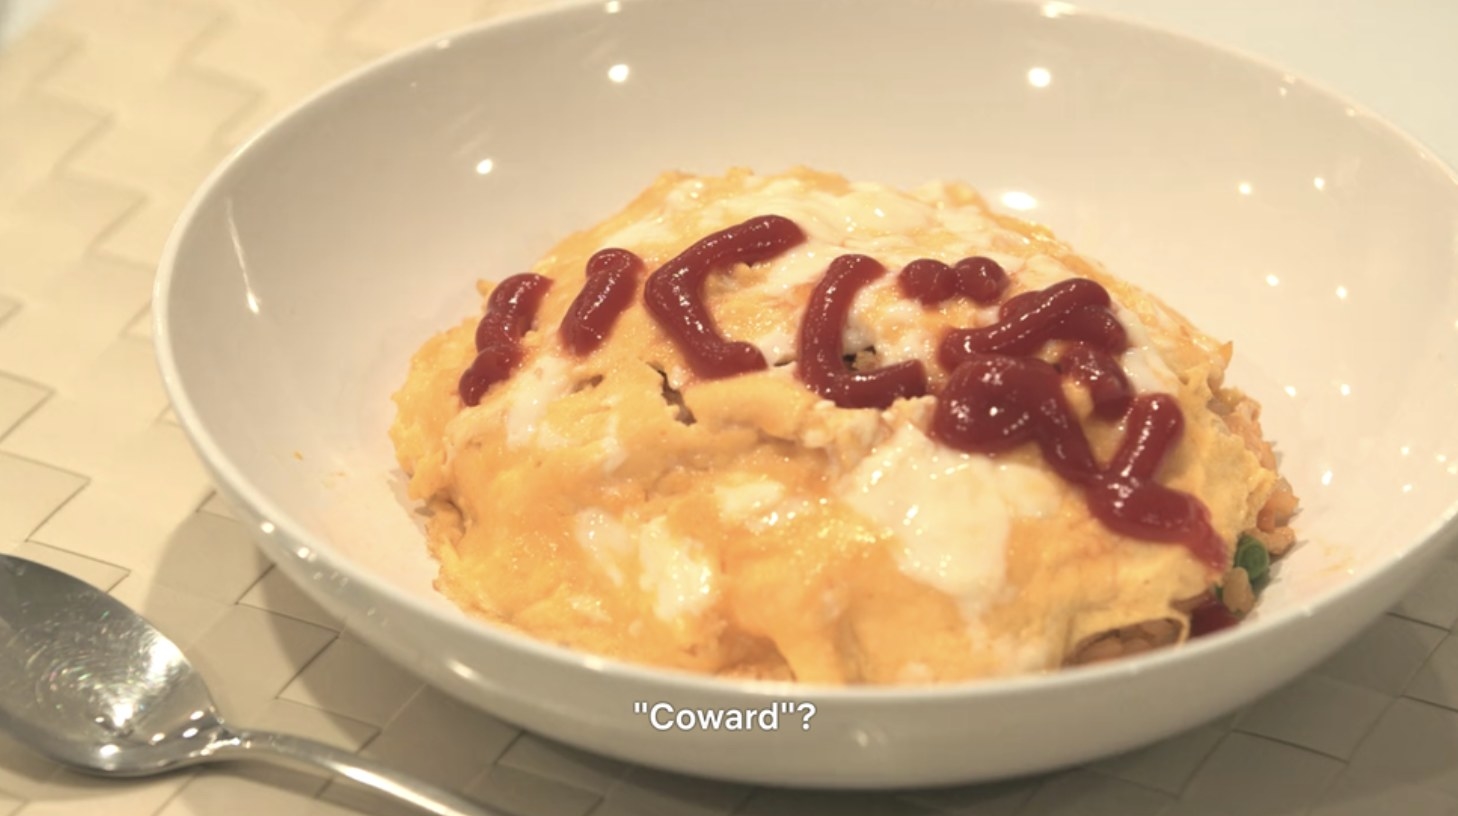 A bow of omurice with coward written in ketchup.